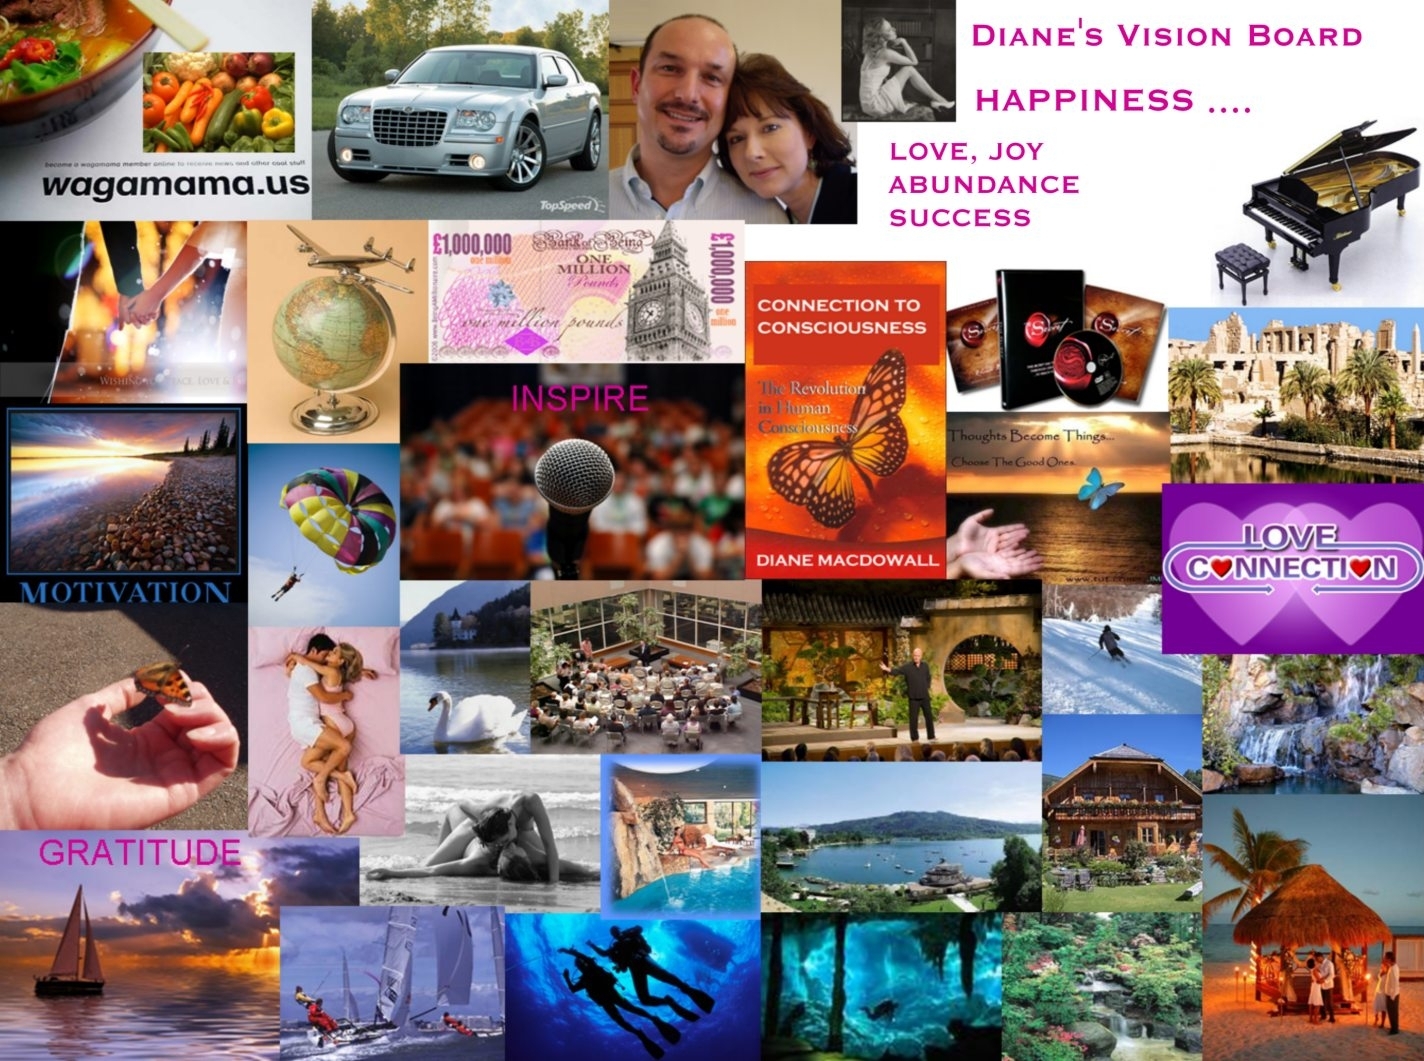 Life coaching services sydney, law of attraction vision board success ...